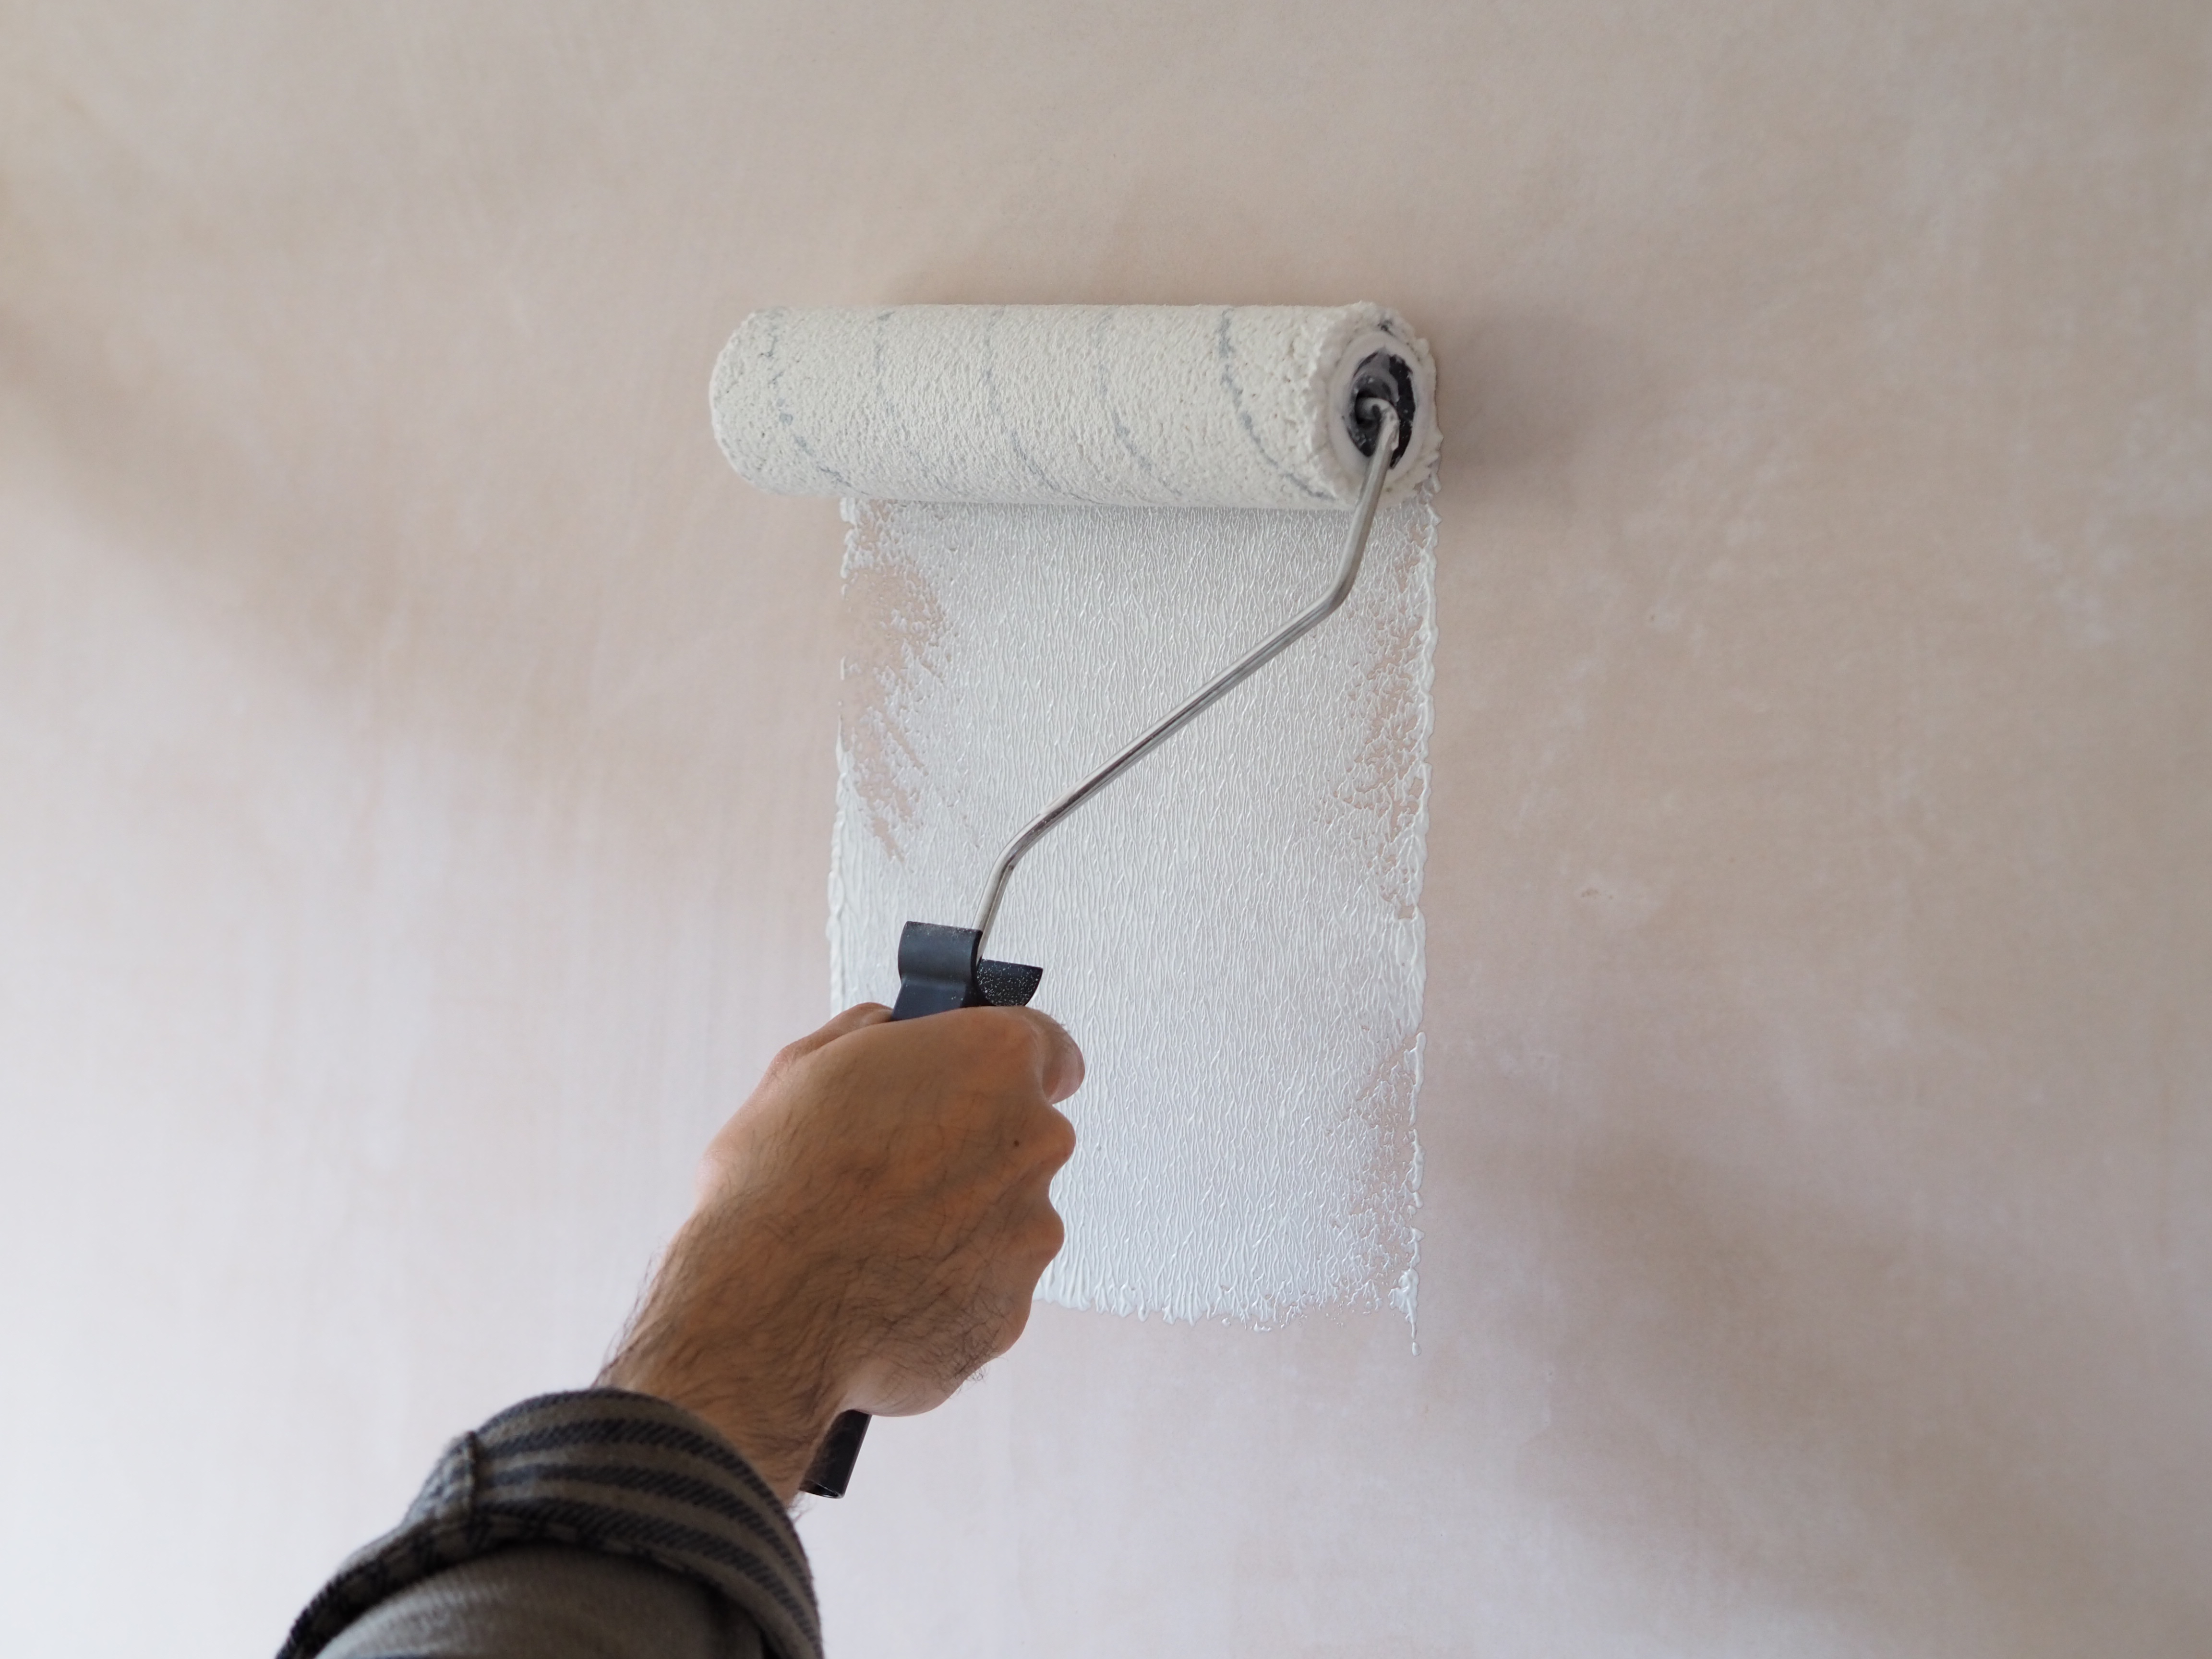 Painting New Plaster: How To Apply A Mist Coat | Homebuilding